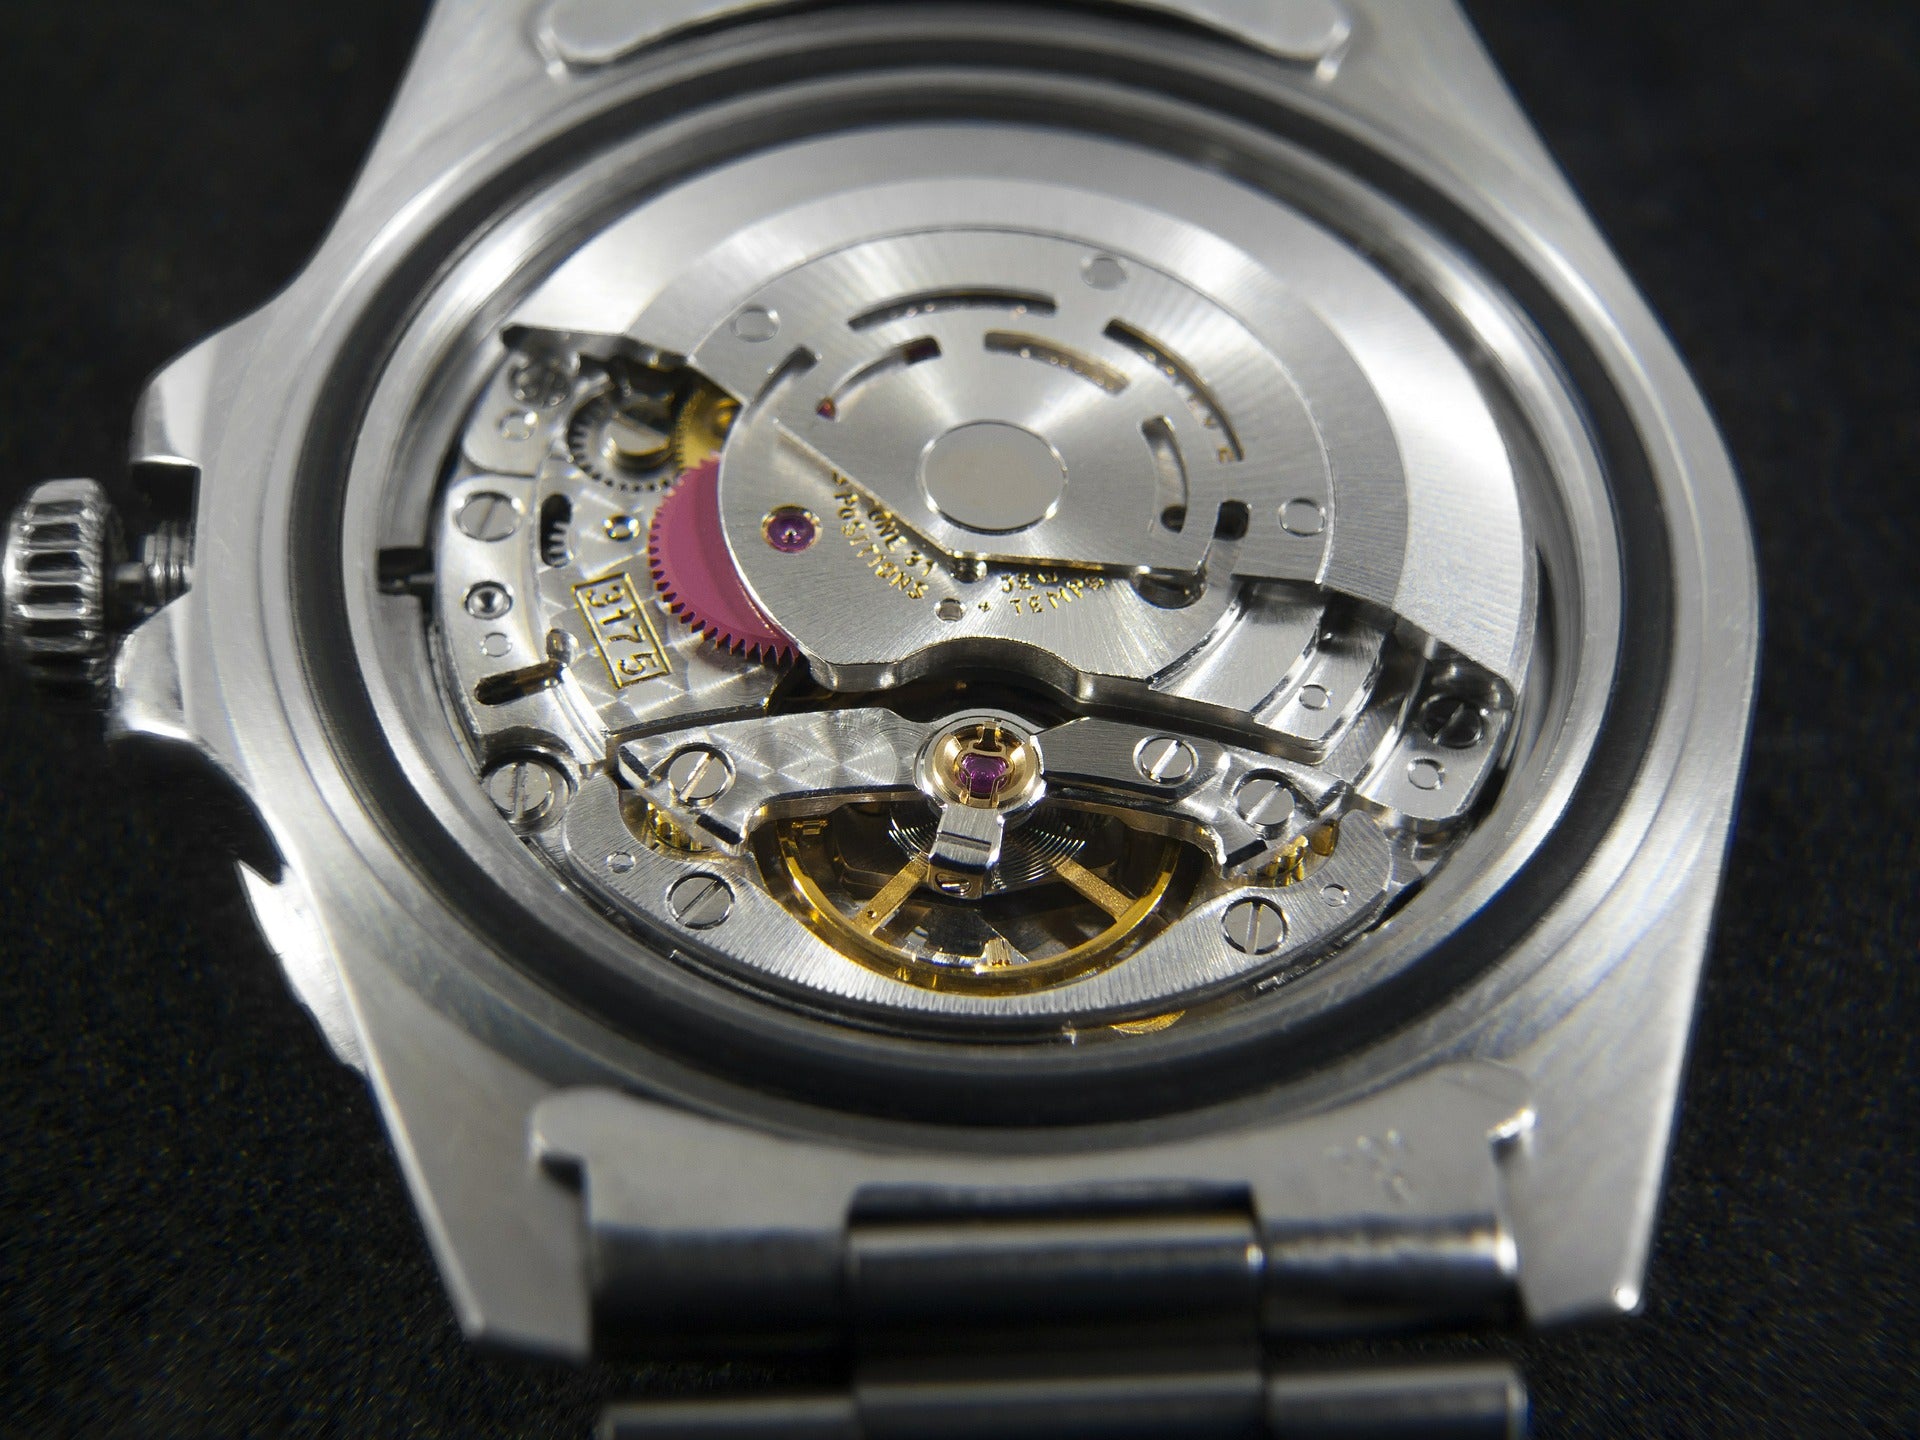 Why Watch Repairs Should Be Left to the Professionals